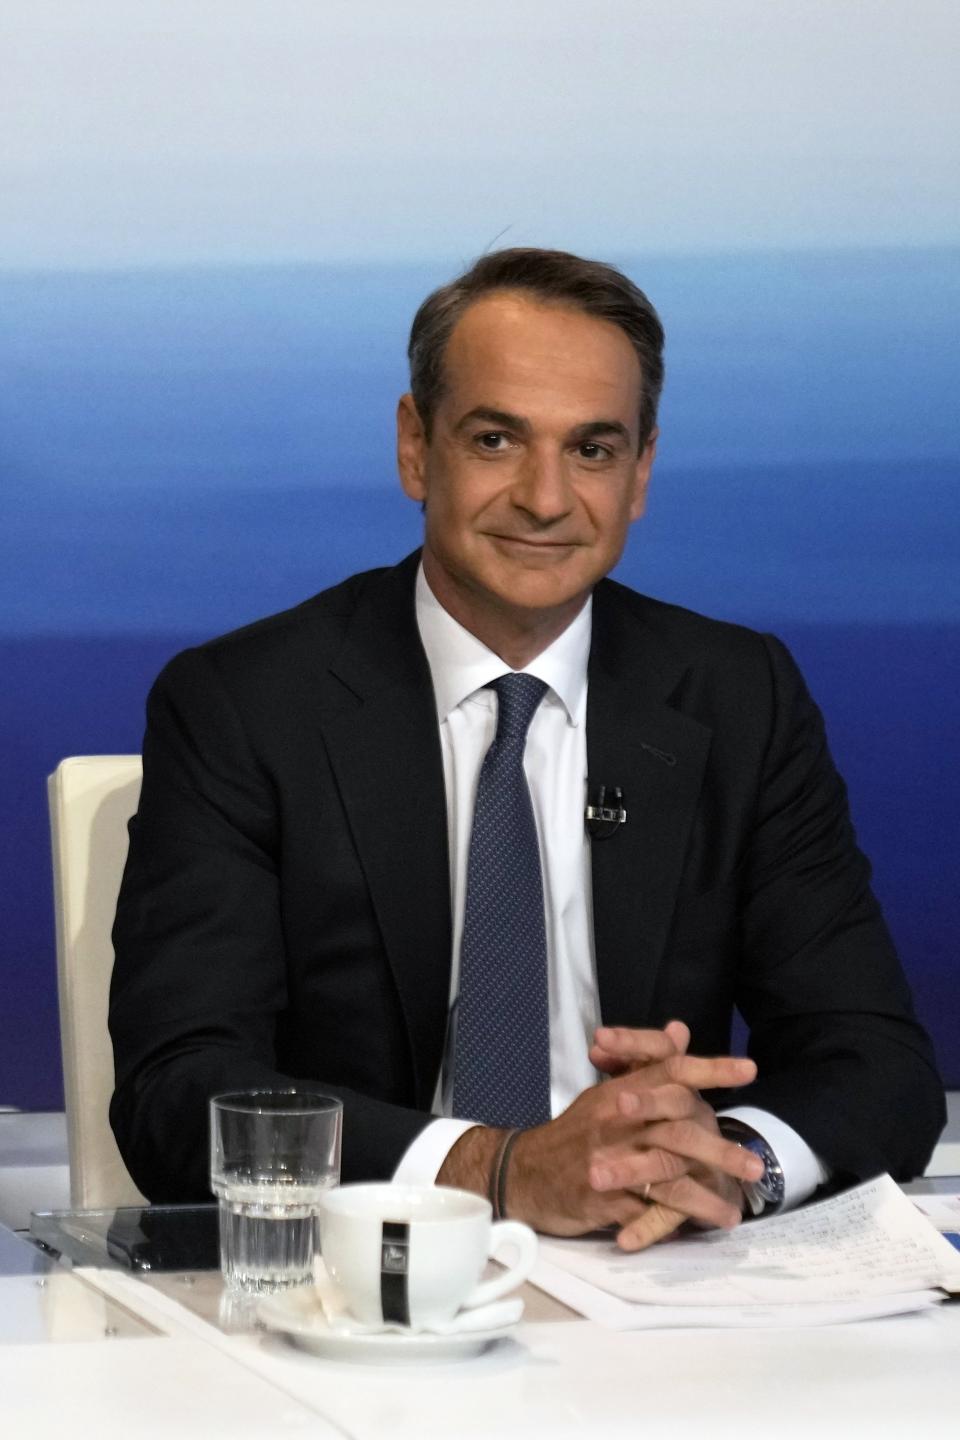 New Democracy leader and Prime Minister Kyriakos Mitsotakis waits for the start of debate at the premises of public broadcaster ERT in Athens, Greece, Wednesday, May 10, 2023. Sunday’s Greek parliamentary election looks likely to be a dress rehearsal for a new round of voting in the busy summer tourist season — barring a surprise coalition deal by dissonant opposition parties. Opinion polls indicate that Prime Minister Kyriakos Mitsotakis' center-right New Democracy could rake in about 35%, some 6 percentage points ahead of leftwing former prime minister Alexis Tsipras' Syriza party. (AP Photo/Thanassis Stavrakis)